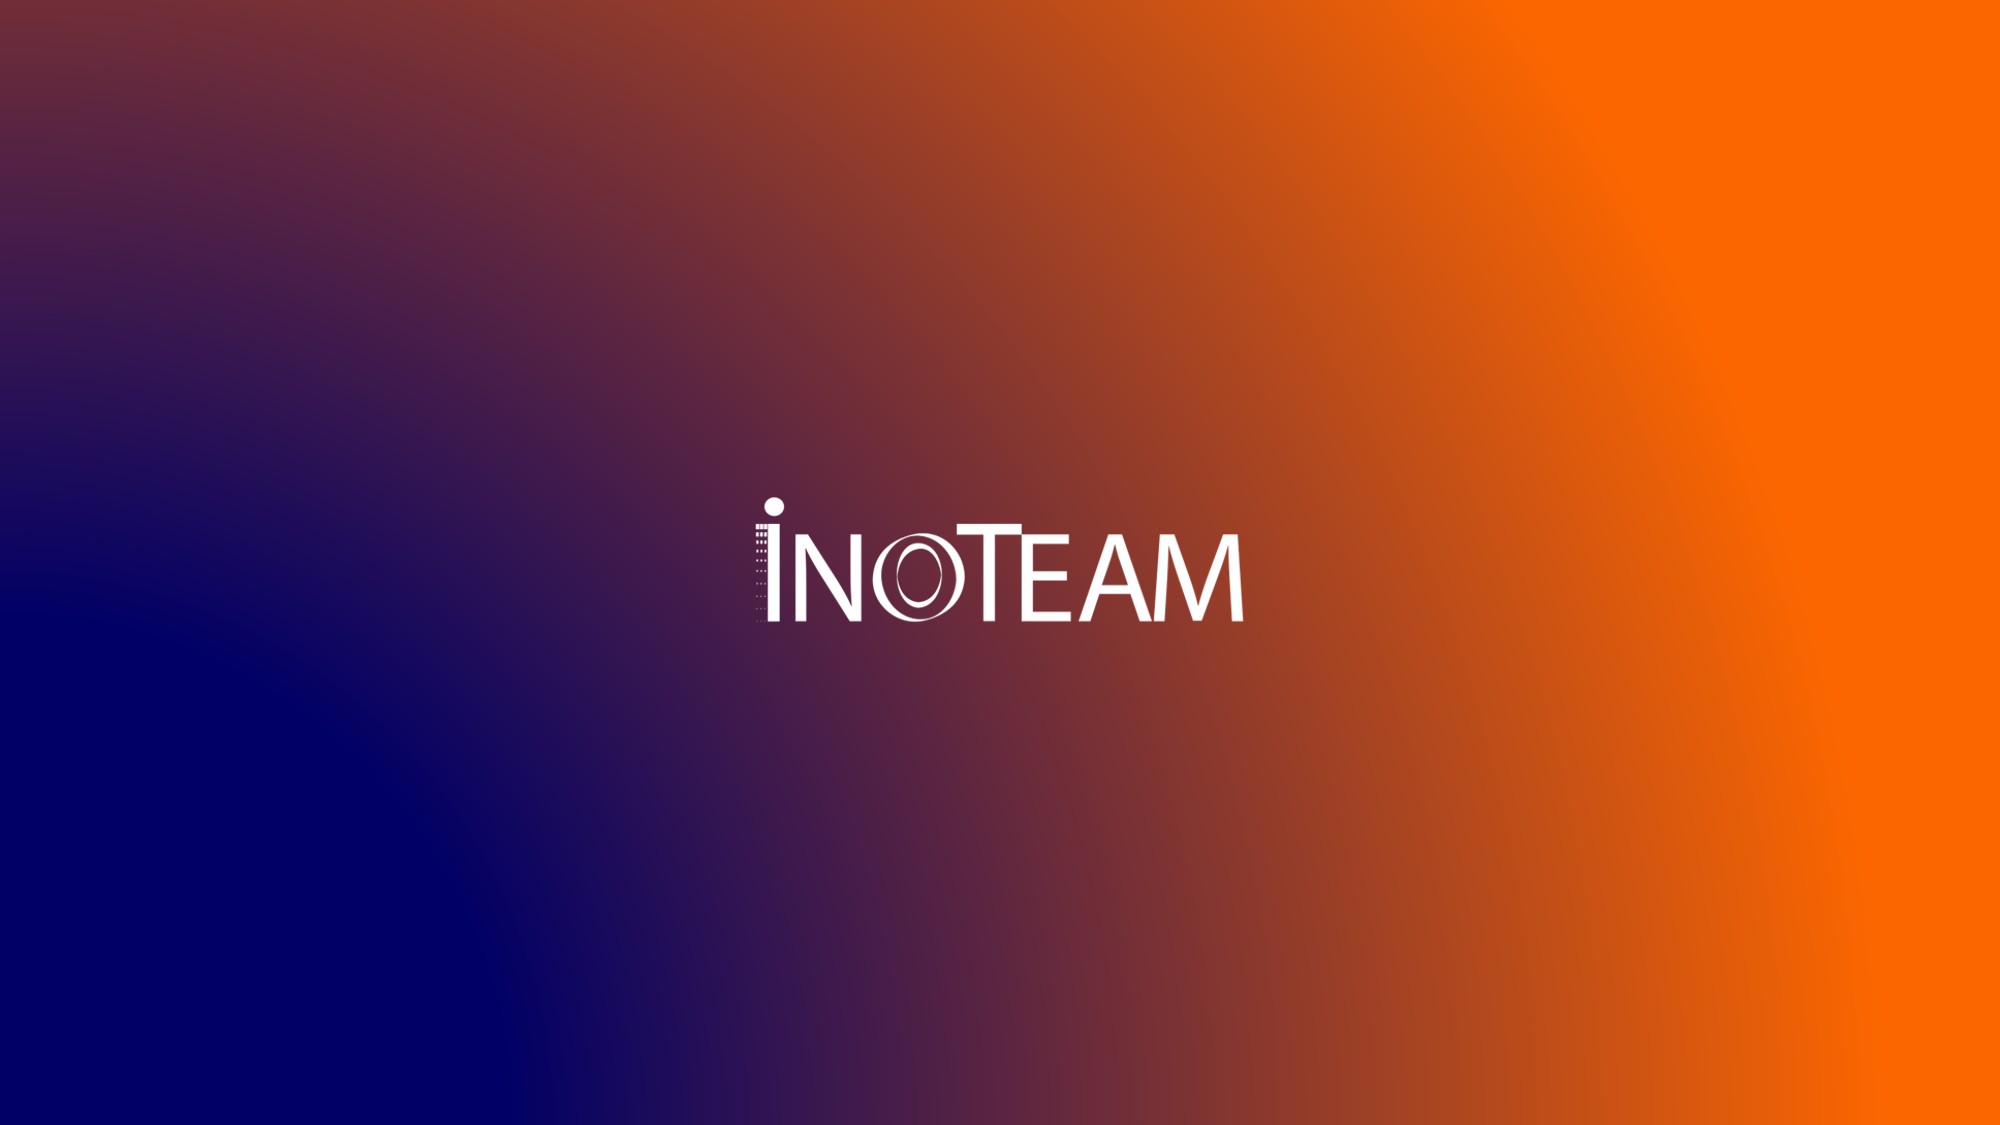 You are currently viewing L’equipe Inoteam s’agrandit !